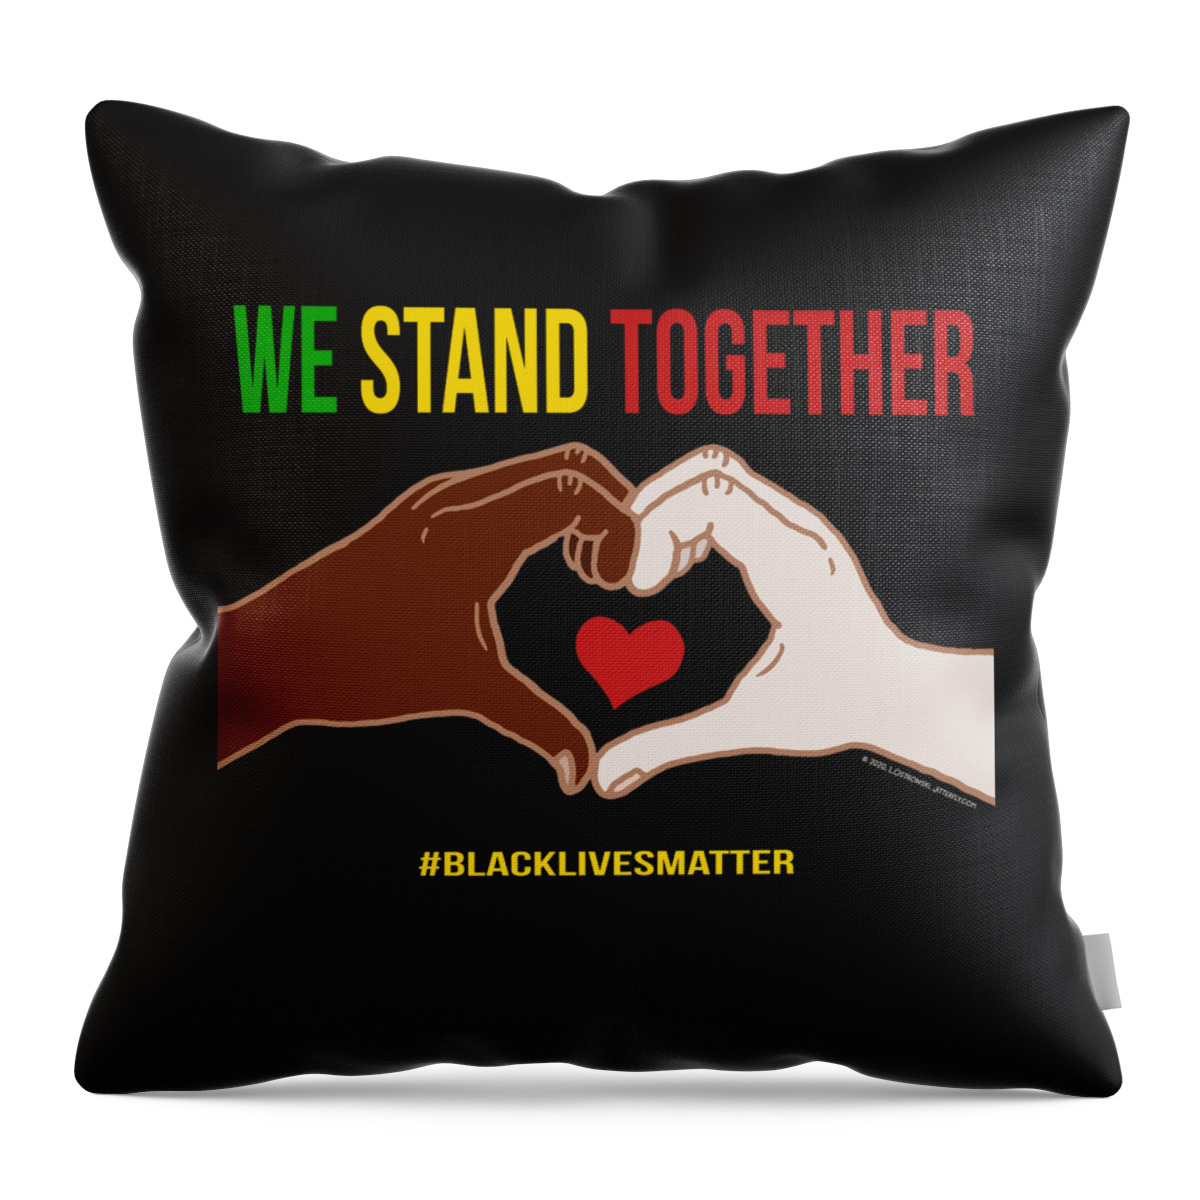 We Stand Together Throw Pillow featuring the digital art We Stand Together Heart Hands by Laura Ostrowski